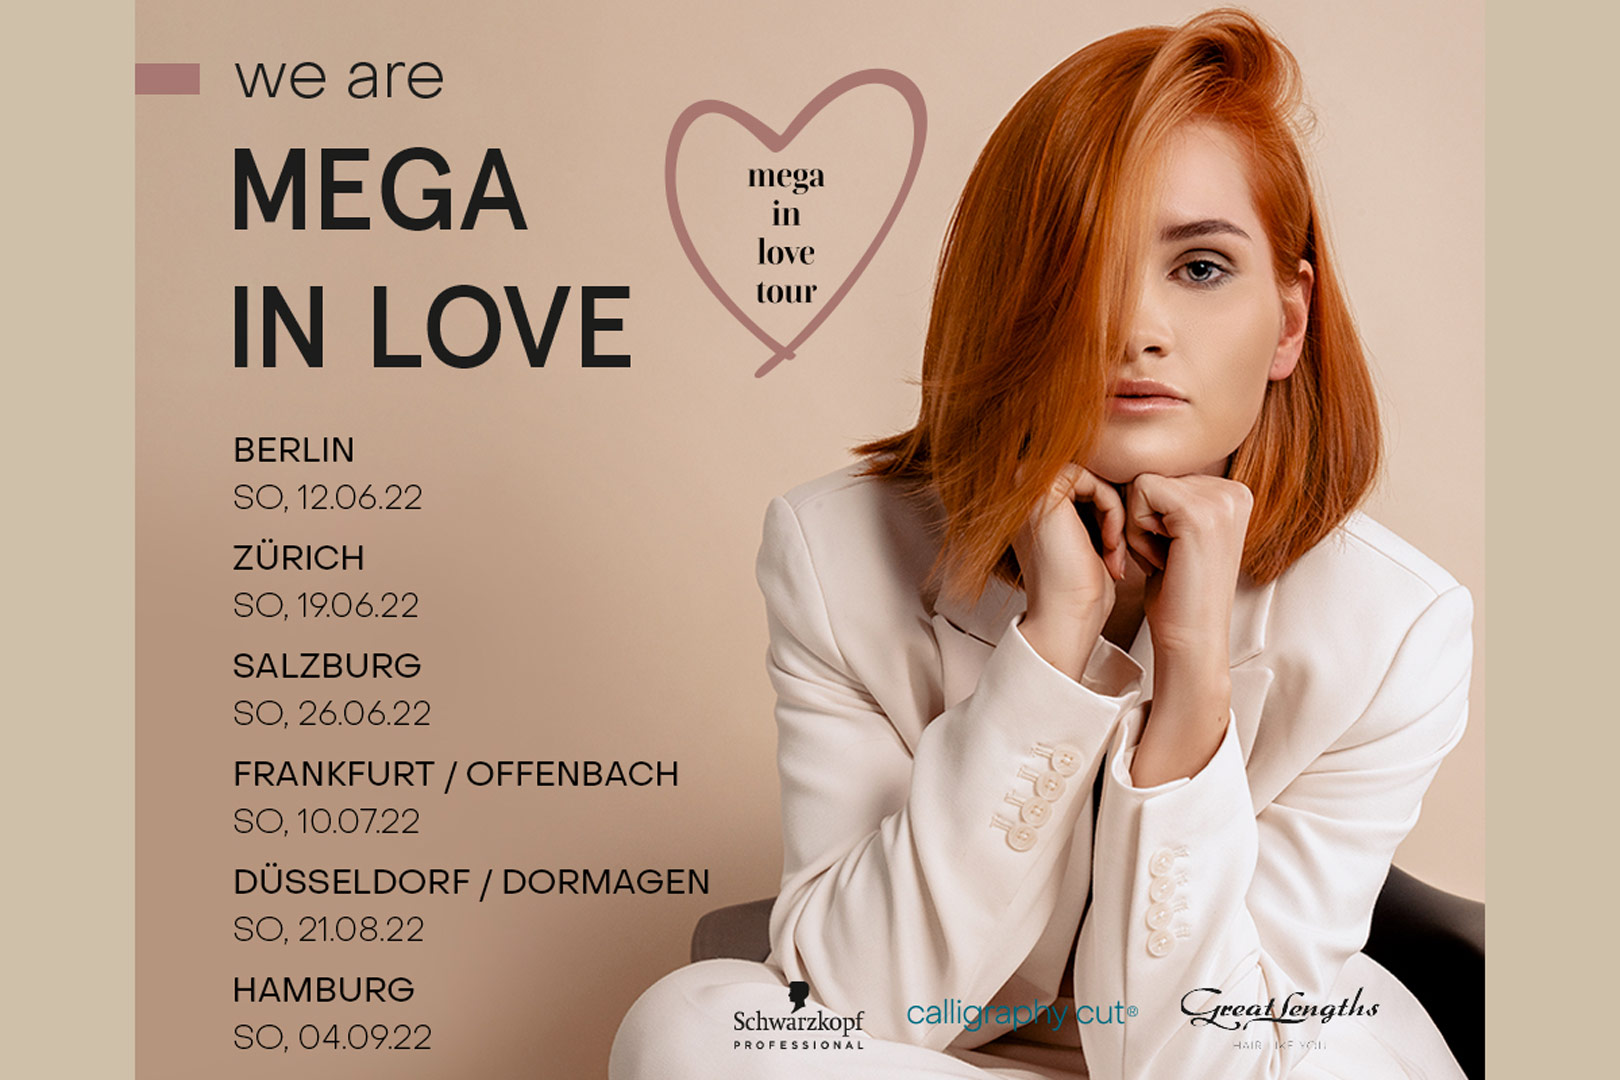 Business-Knowhow-Fashion-Selfcare-MEGA-IN-LOVE-Tour-gastiert-in-sechs-Staedten-5554-1